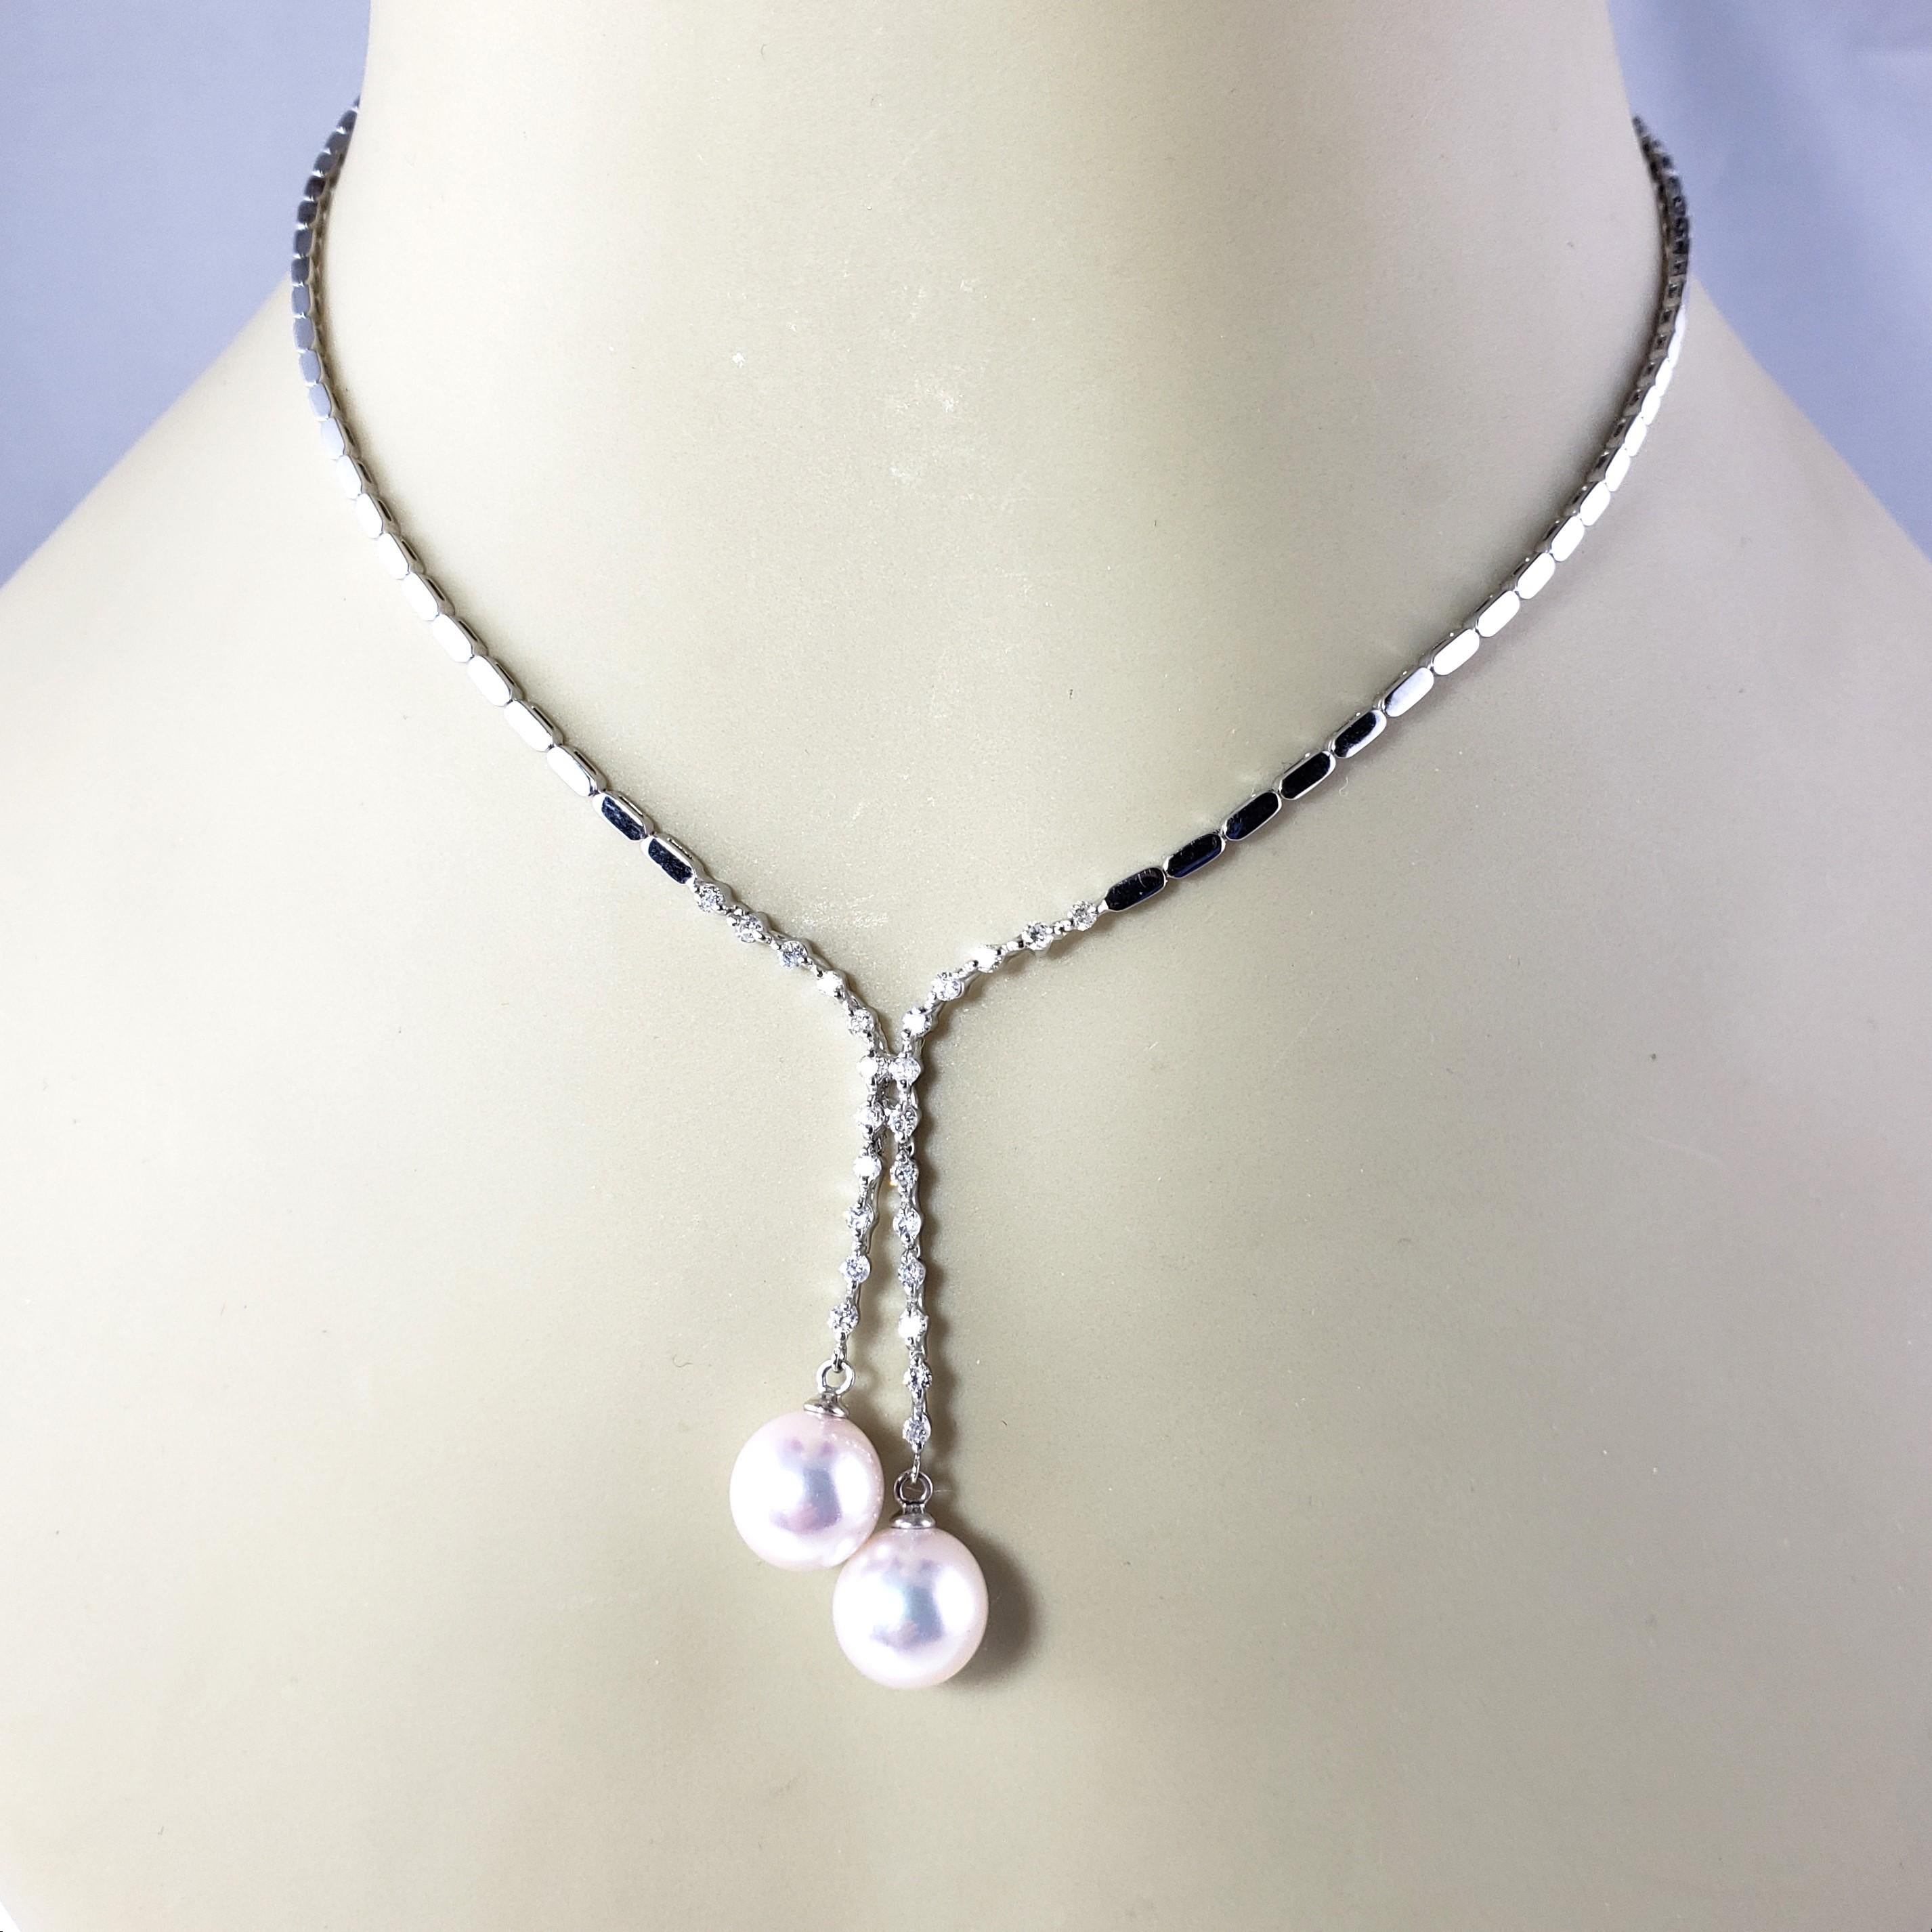 18 Karat White Gold Akoya Pearl and Diamond Necklace #13909 For Sale 4